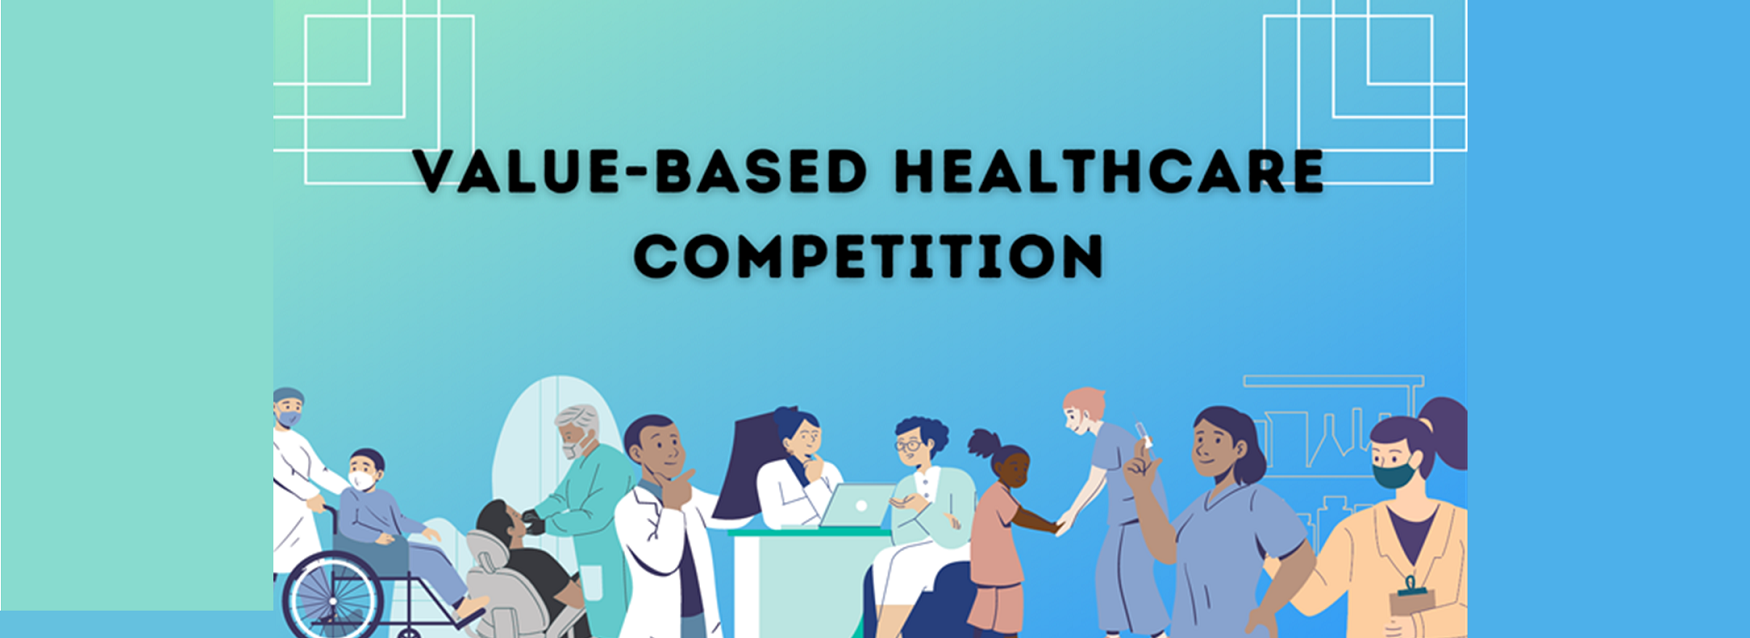 Value Based Healthcare Competition text with medical icon background